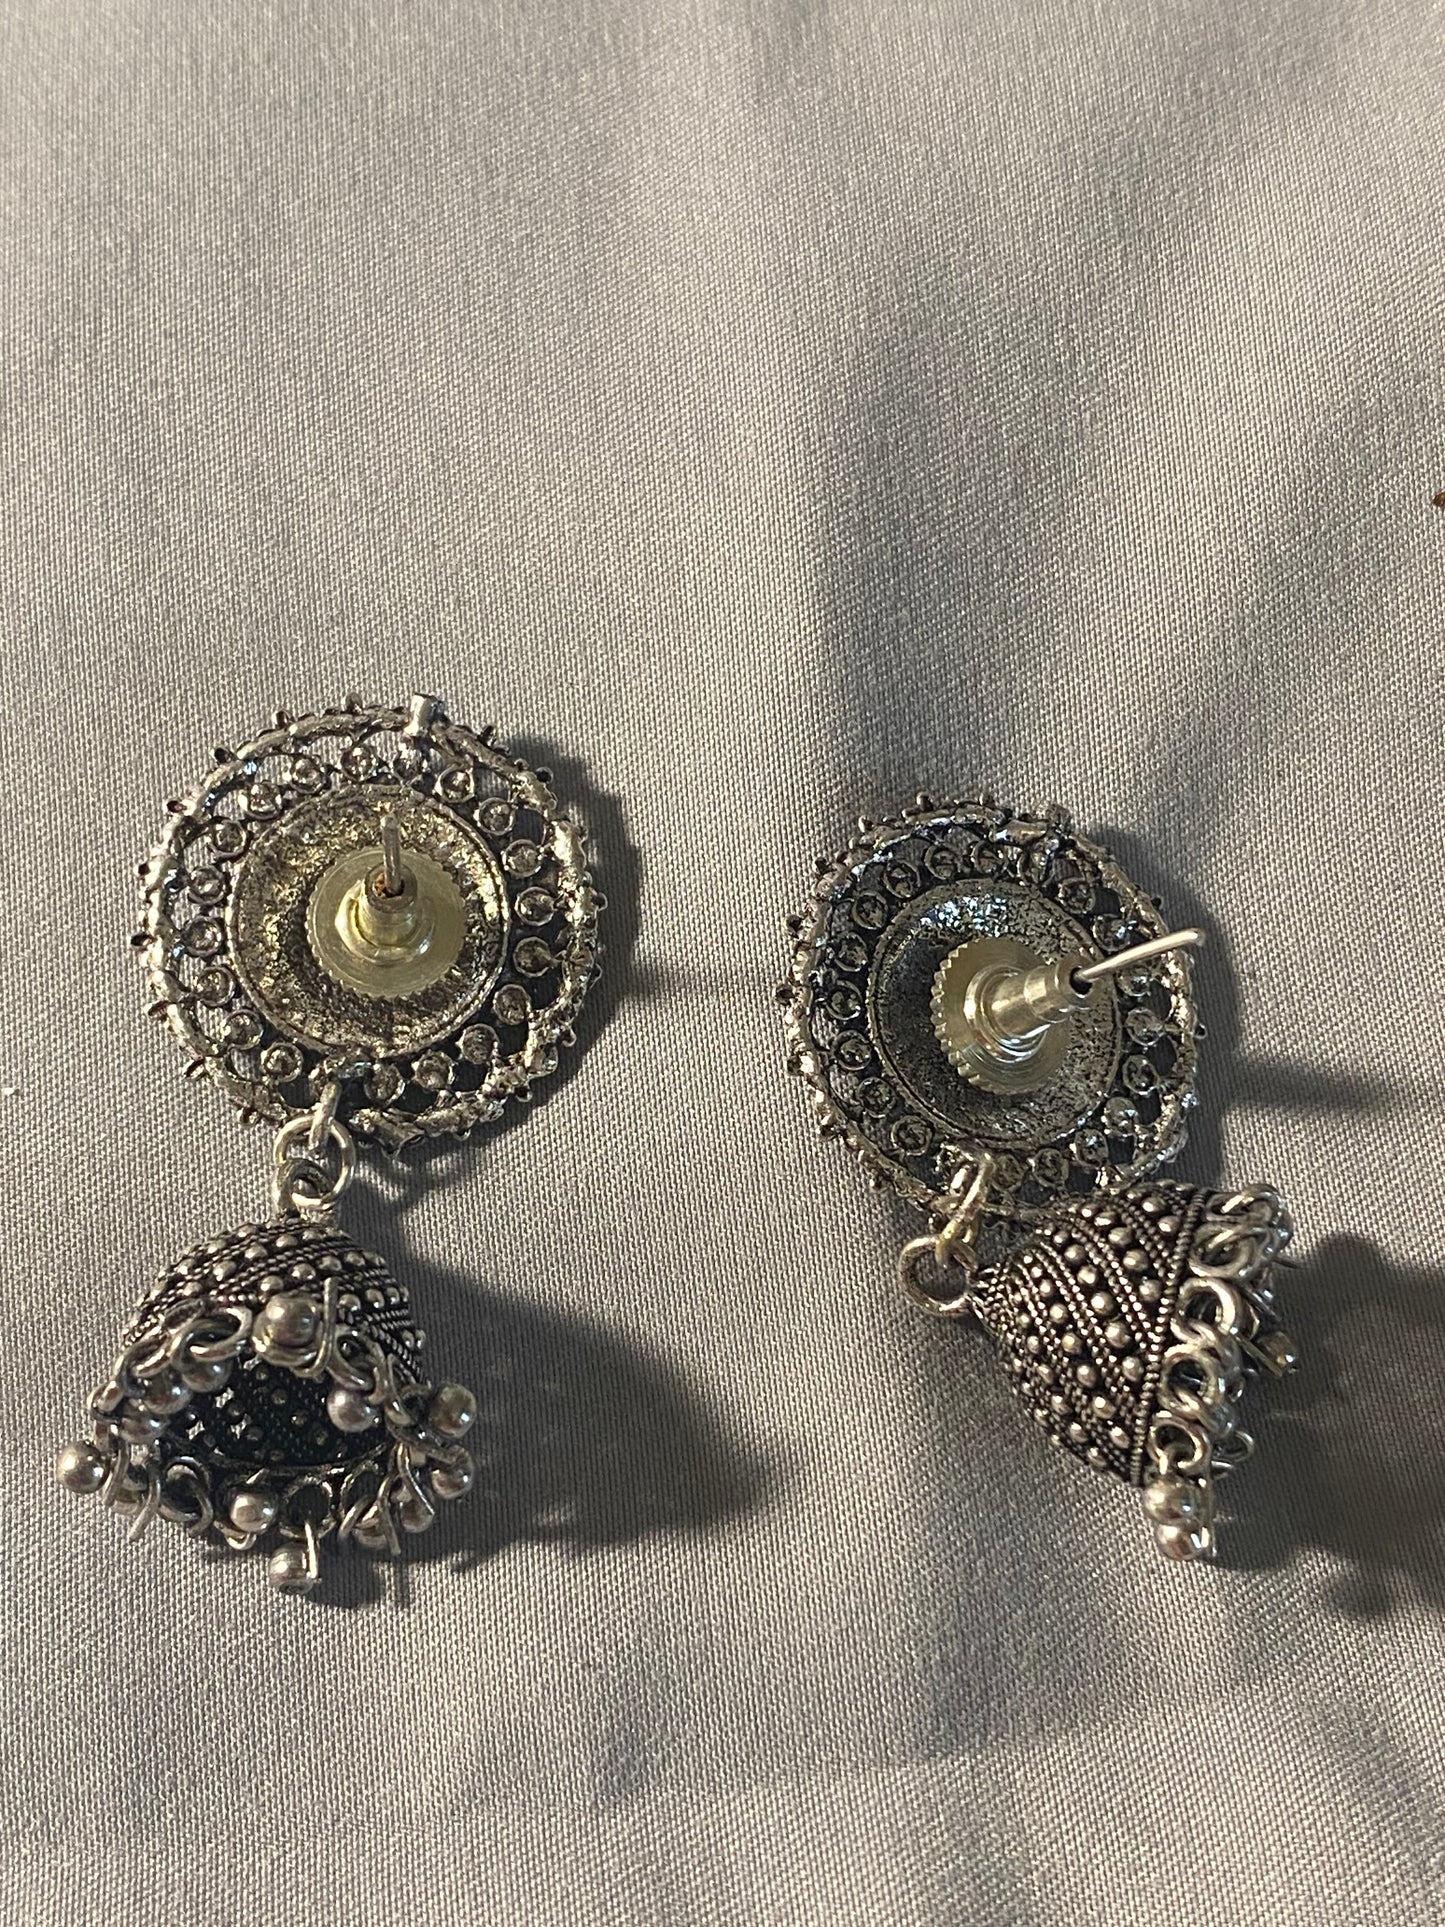 New Jewelry: Small Silver Jhumkis